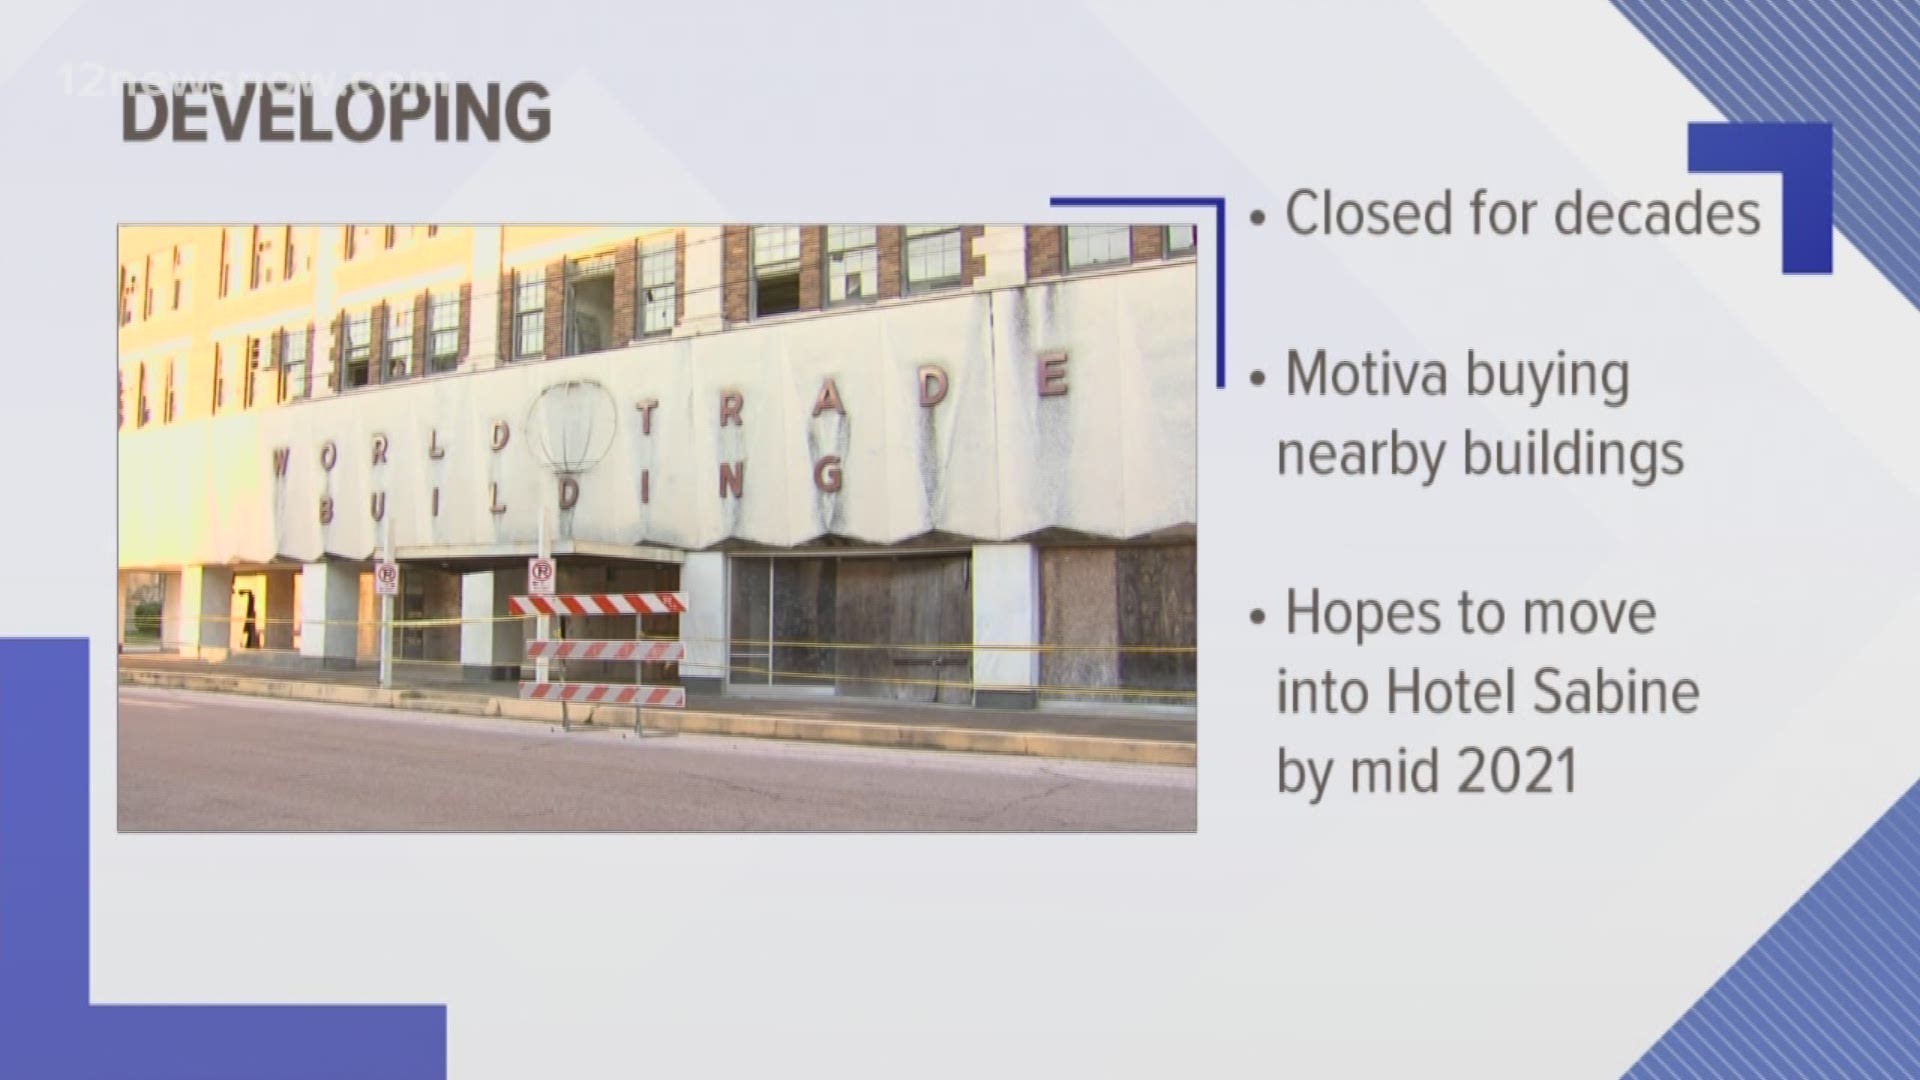 The hotel has been closed for decades.